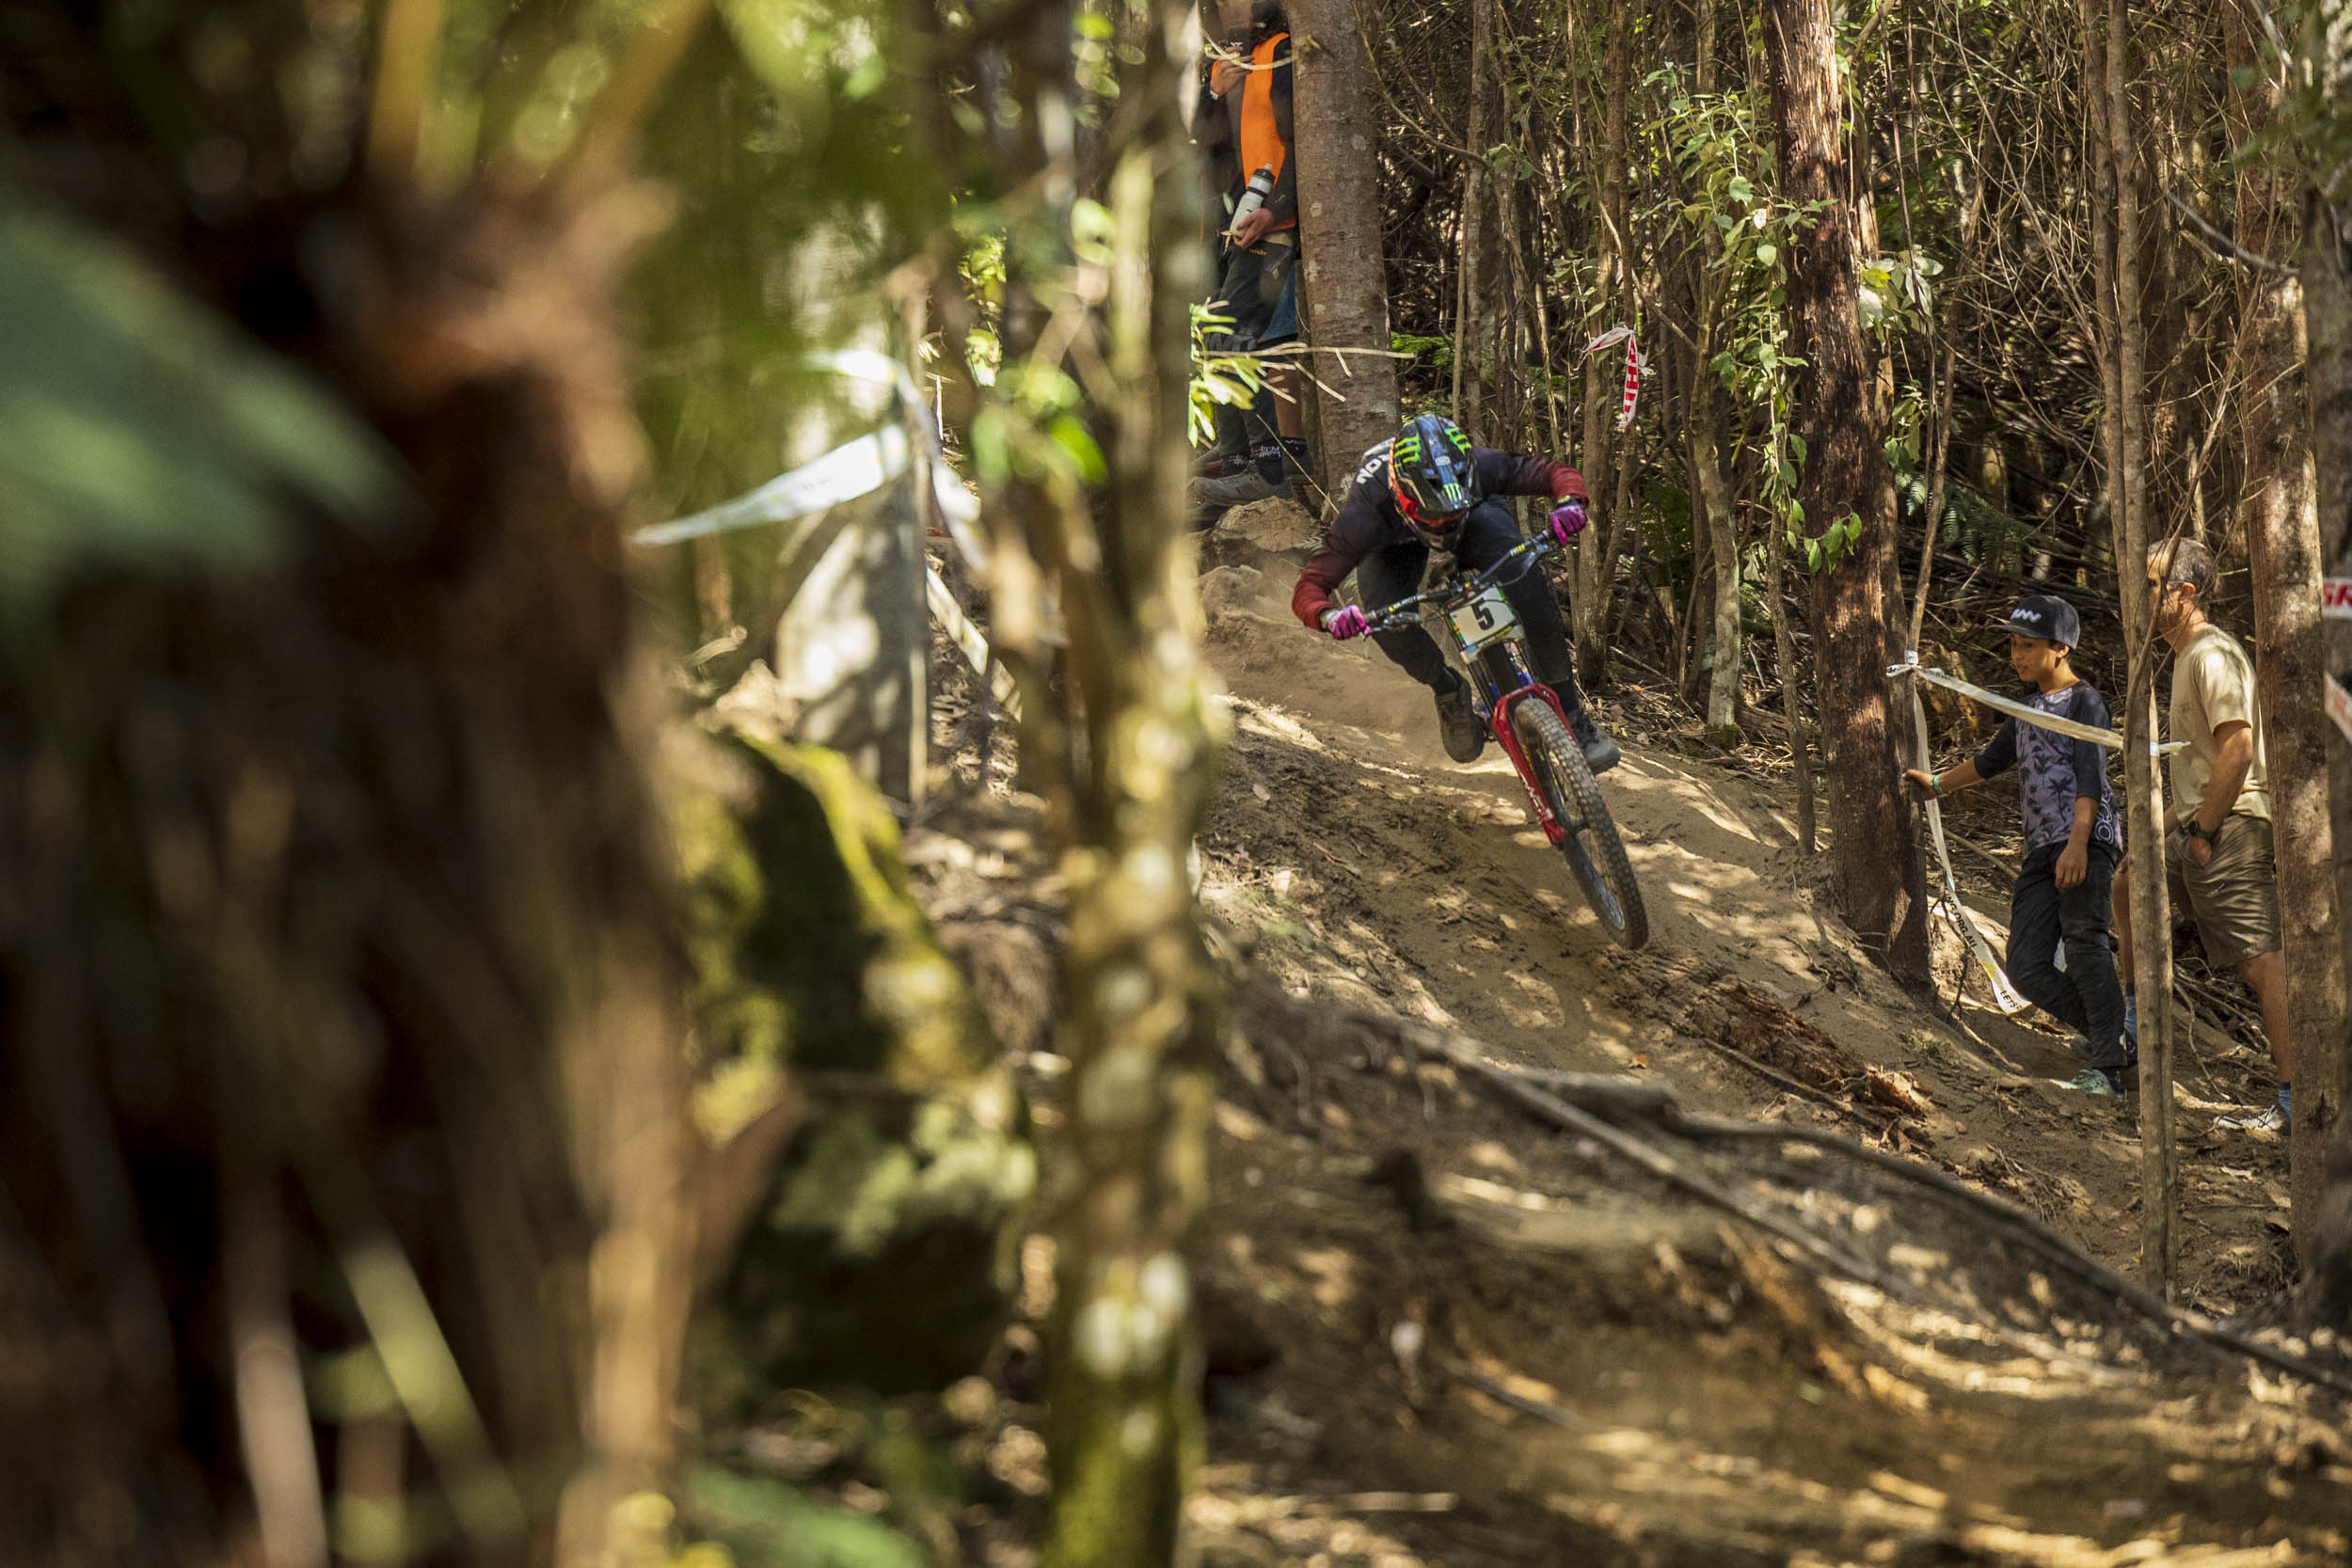 Monster Energy’s Connor Fearon Takes First Place at Australian Mountain Bike Downhill Championships in Maydena